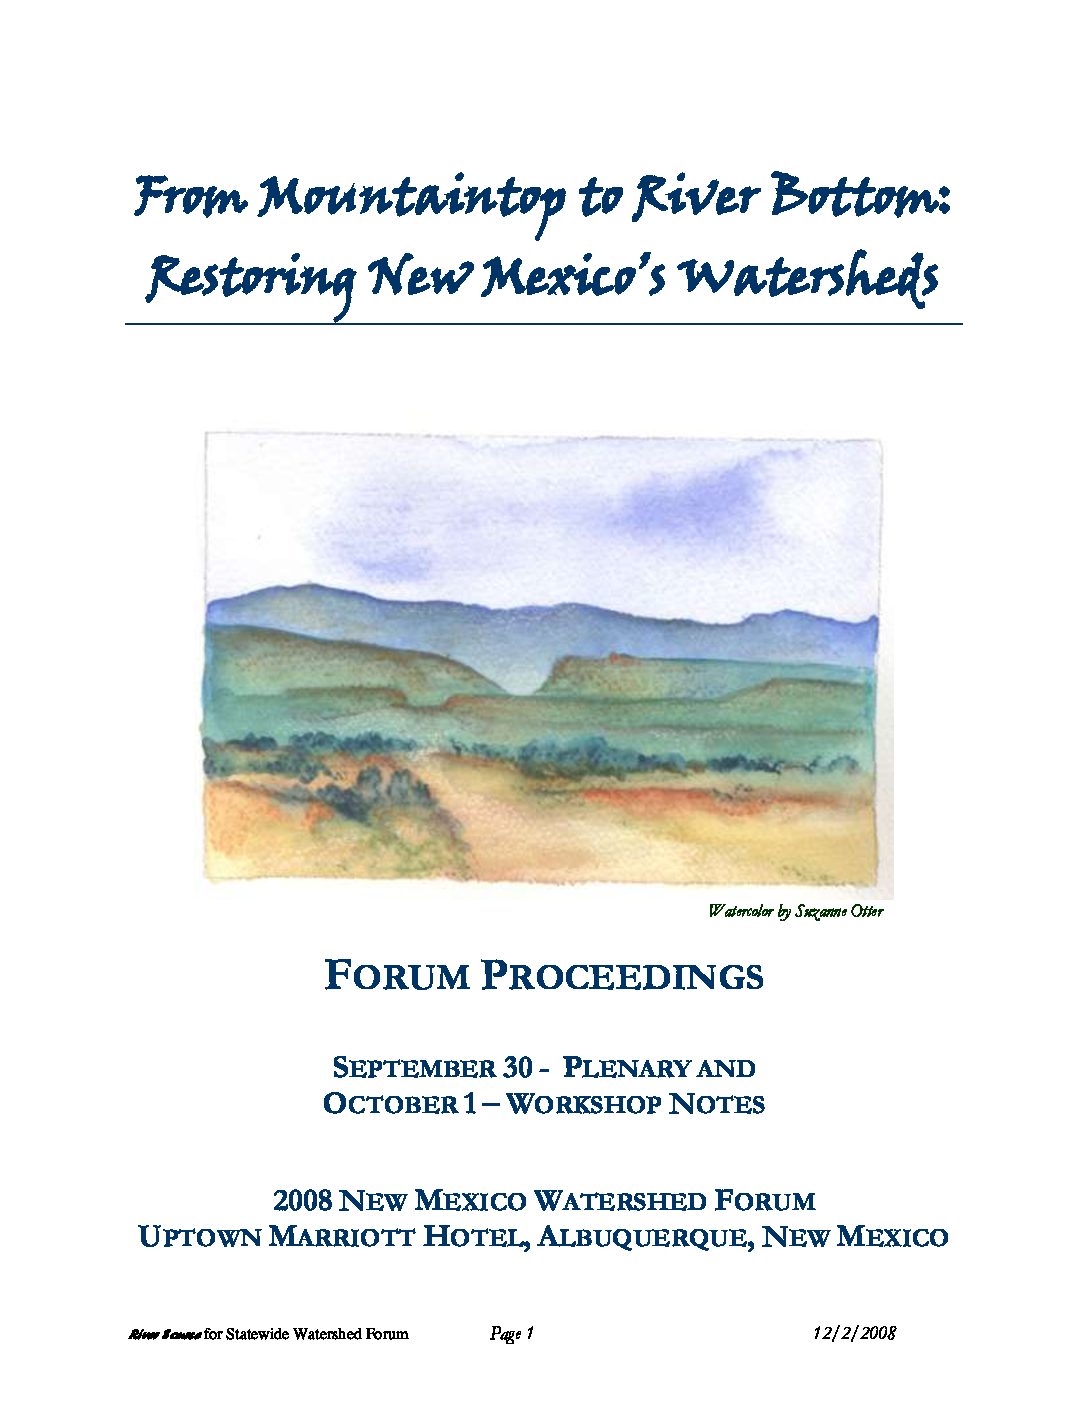 NM Watershed Forum Notes 2008